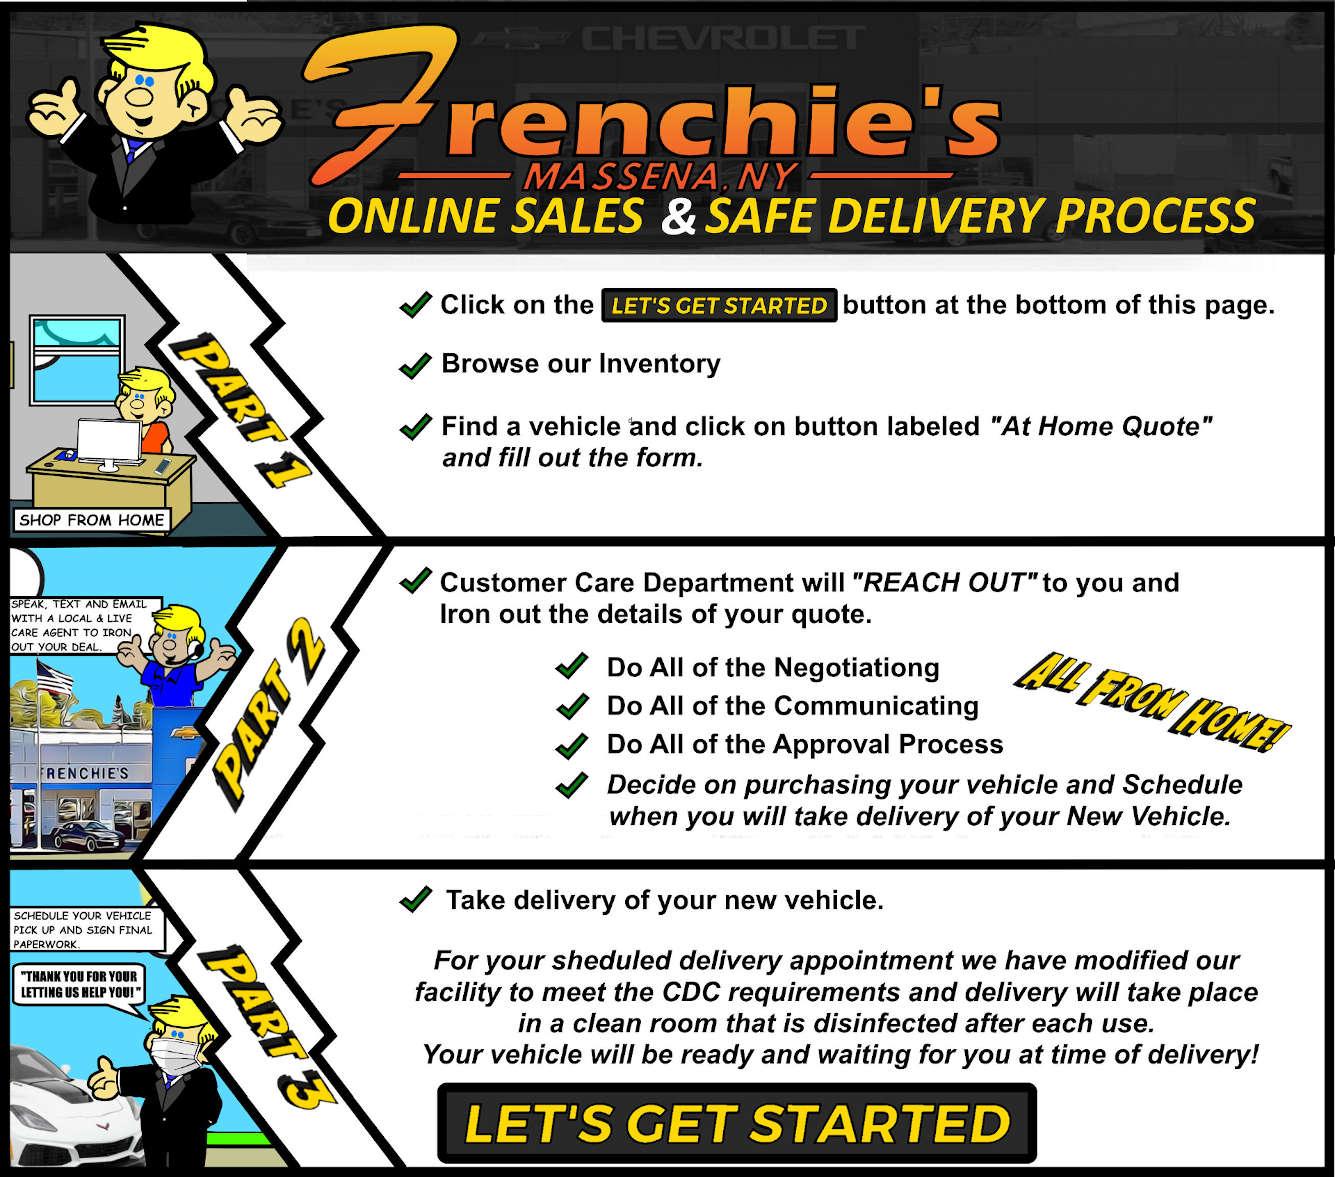 Frenchies - Online Sales & Safe Delivery Process | Part 1: Click on let's get started at the bottom of the page. Browse our inventory, find a vehicle and click on the button labeled "At Home Quote" and fill out the form. | Part 2: The customer care department will reach out to you and iron out the details of your quote. Do all the negotiating, communicating, and approval process all from home. Decide on purchasing your vehicle and schedule when you will take delivery of you new vehicle. | Part 3: take delivery of your new vehicle. For your scheduled delivery appointment we have modified our facility to meet the CDC requirements and delivery will take place in a clean room that is disinfected after each use. Your vehicle will be ready and waiting for you at time of delivery.